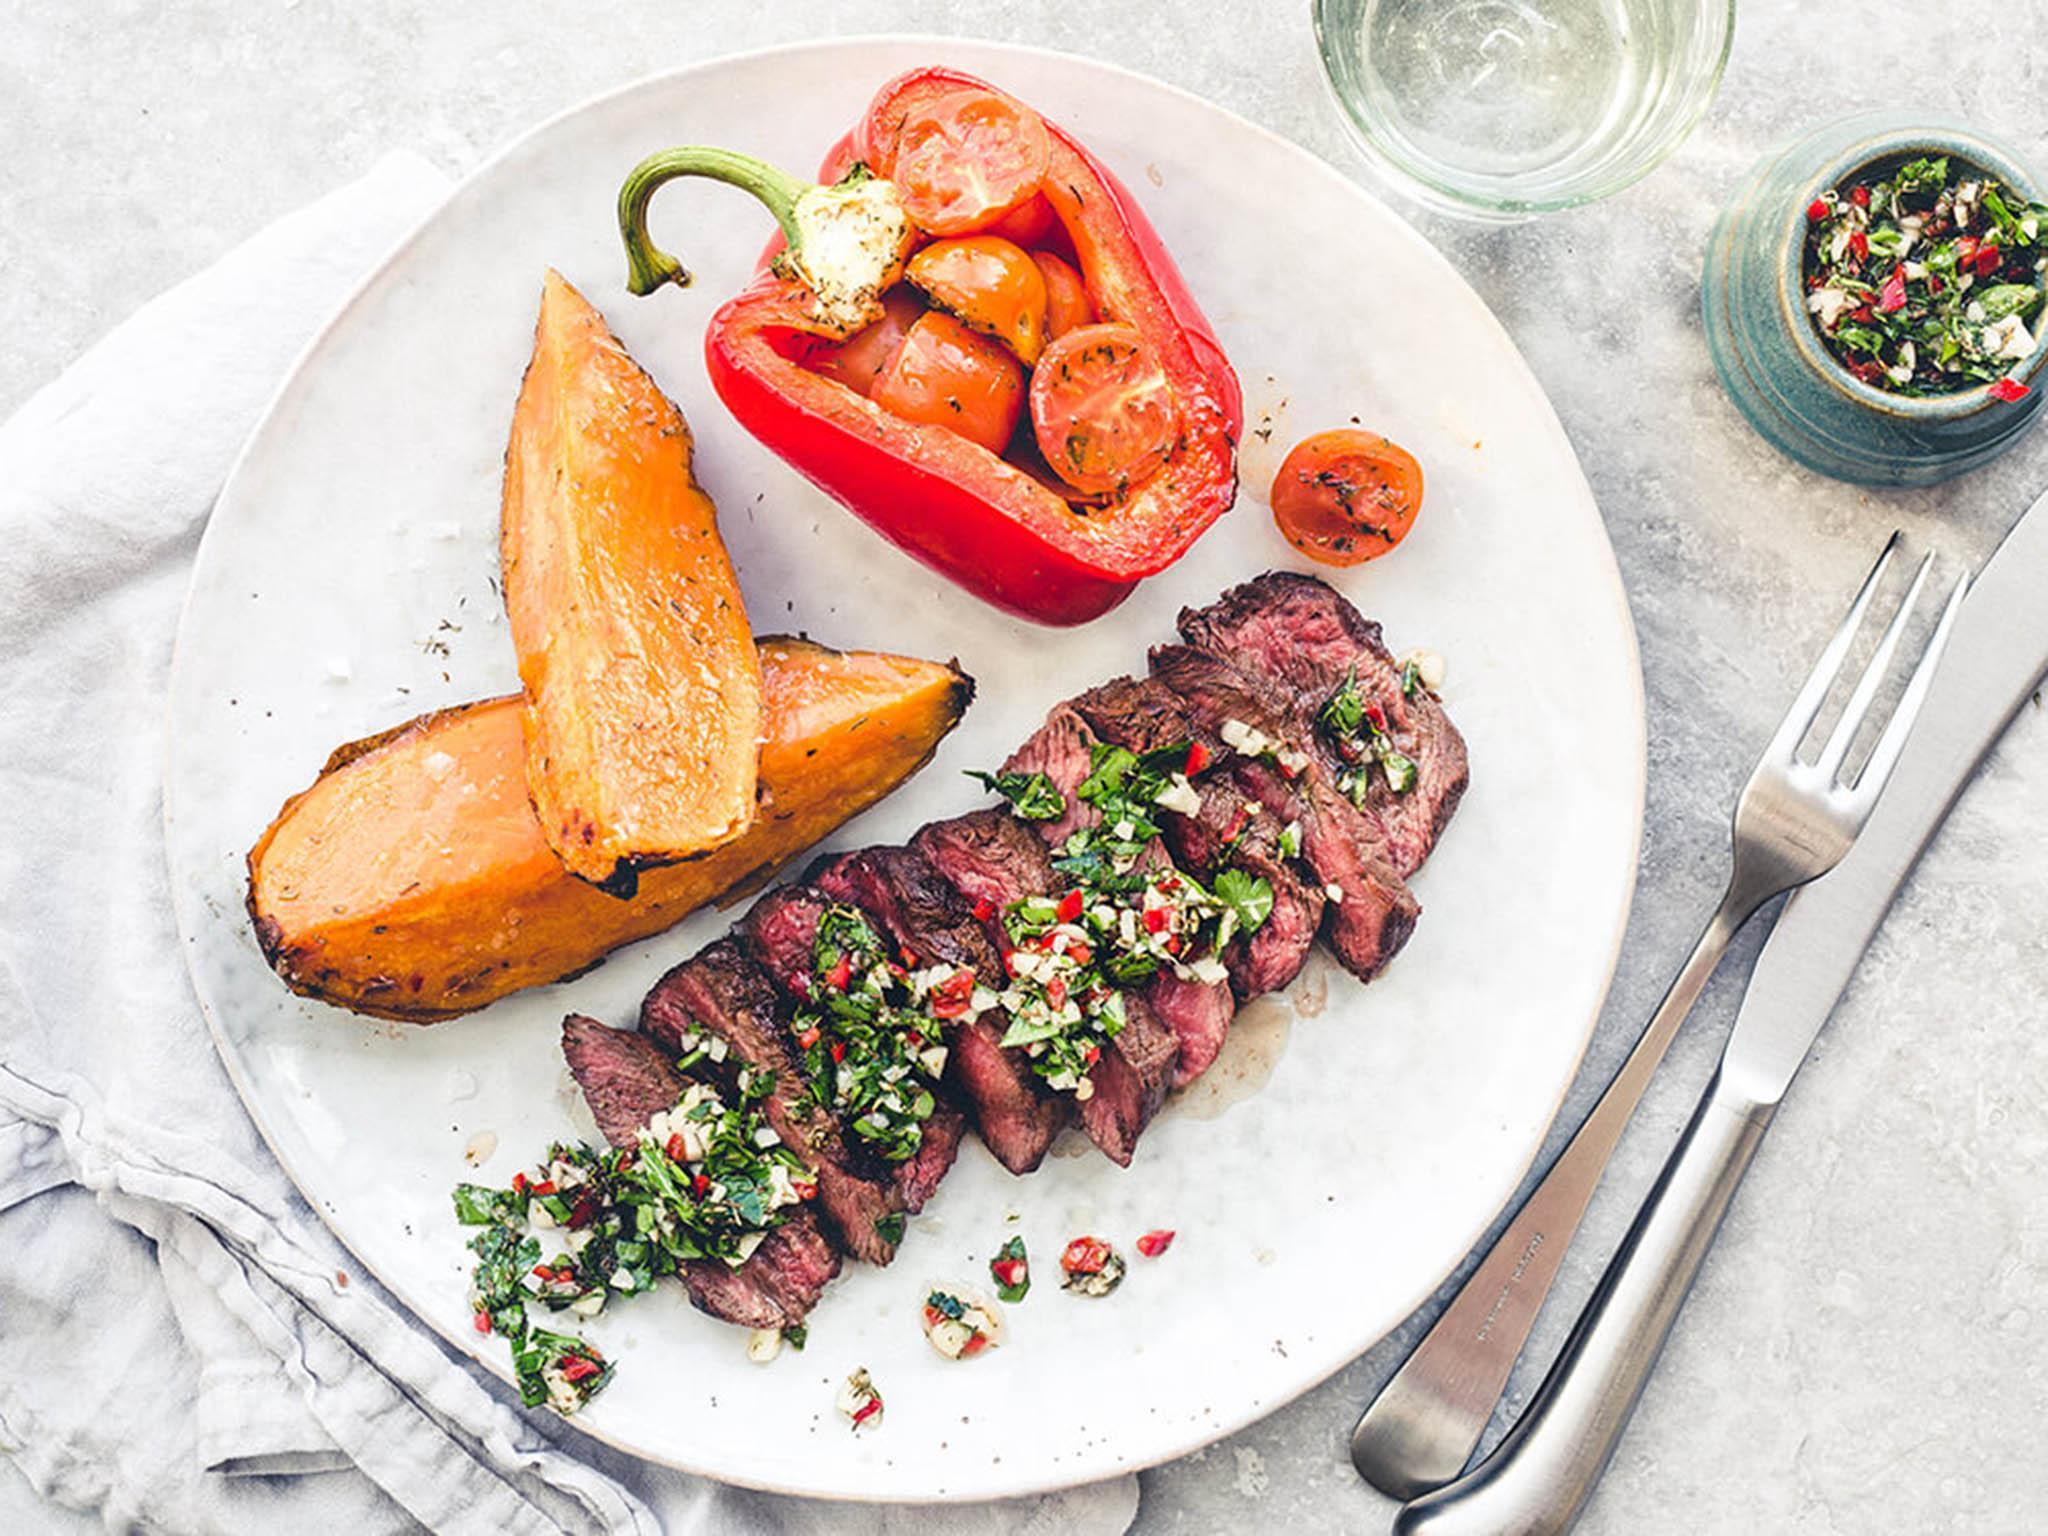 This Argentinian sauce adds a spicy kick to thinly-sliced steak